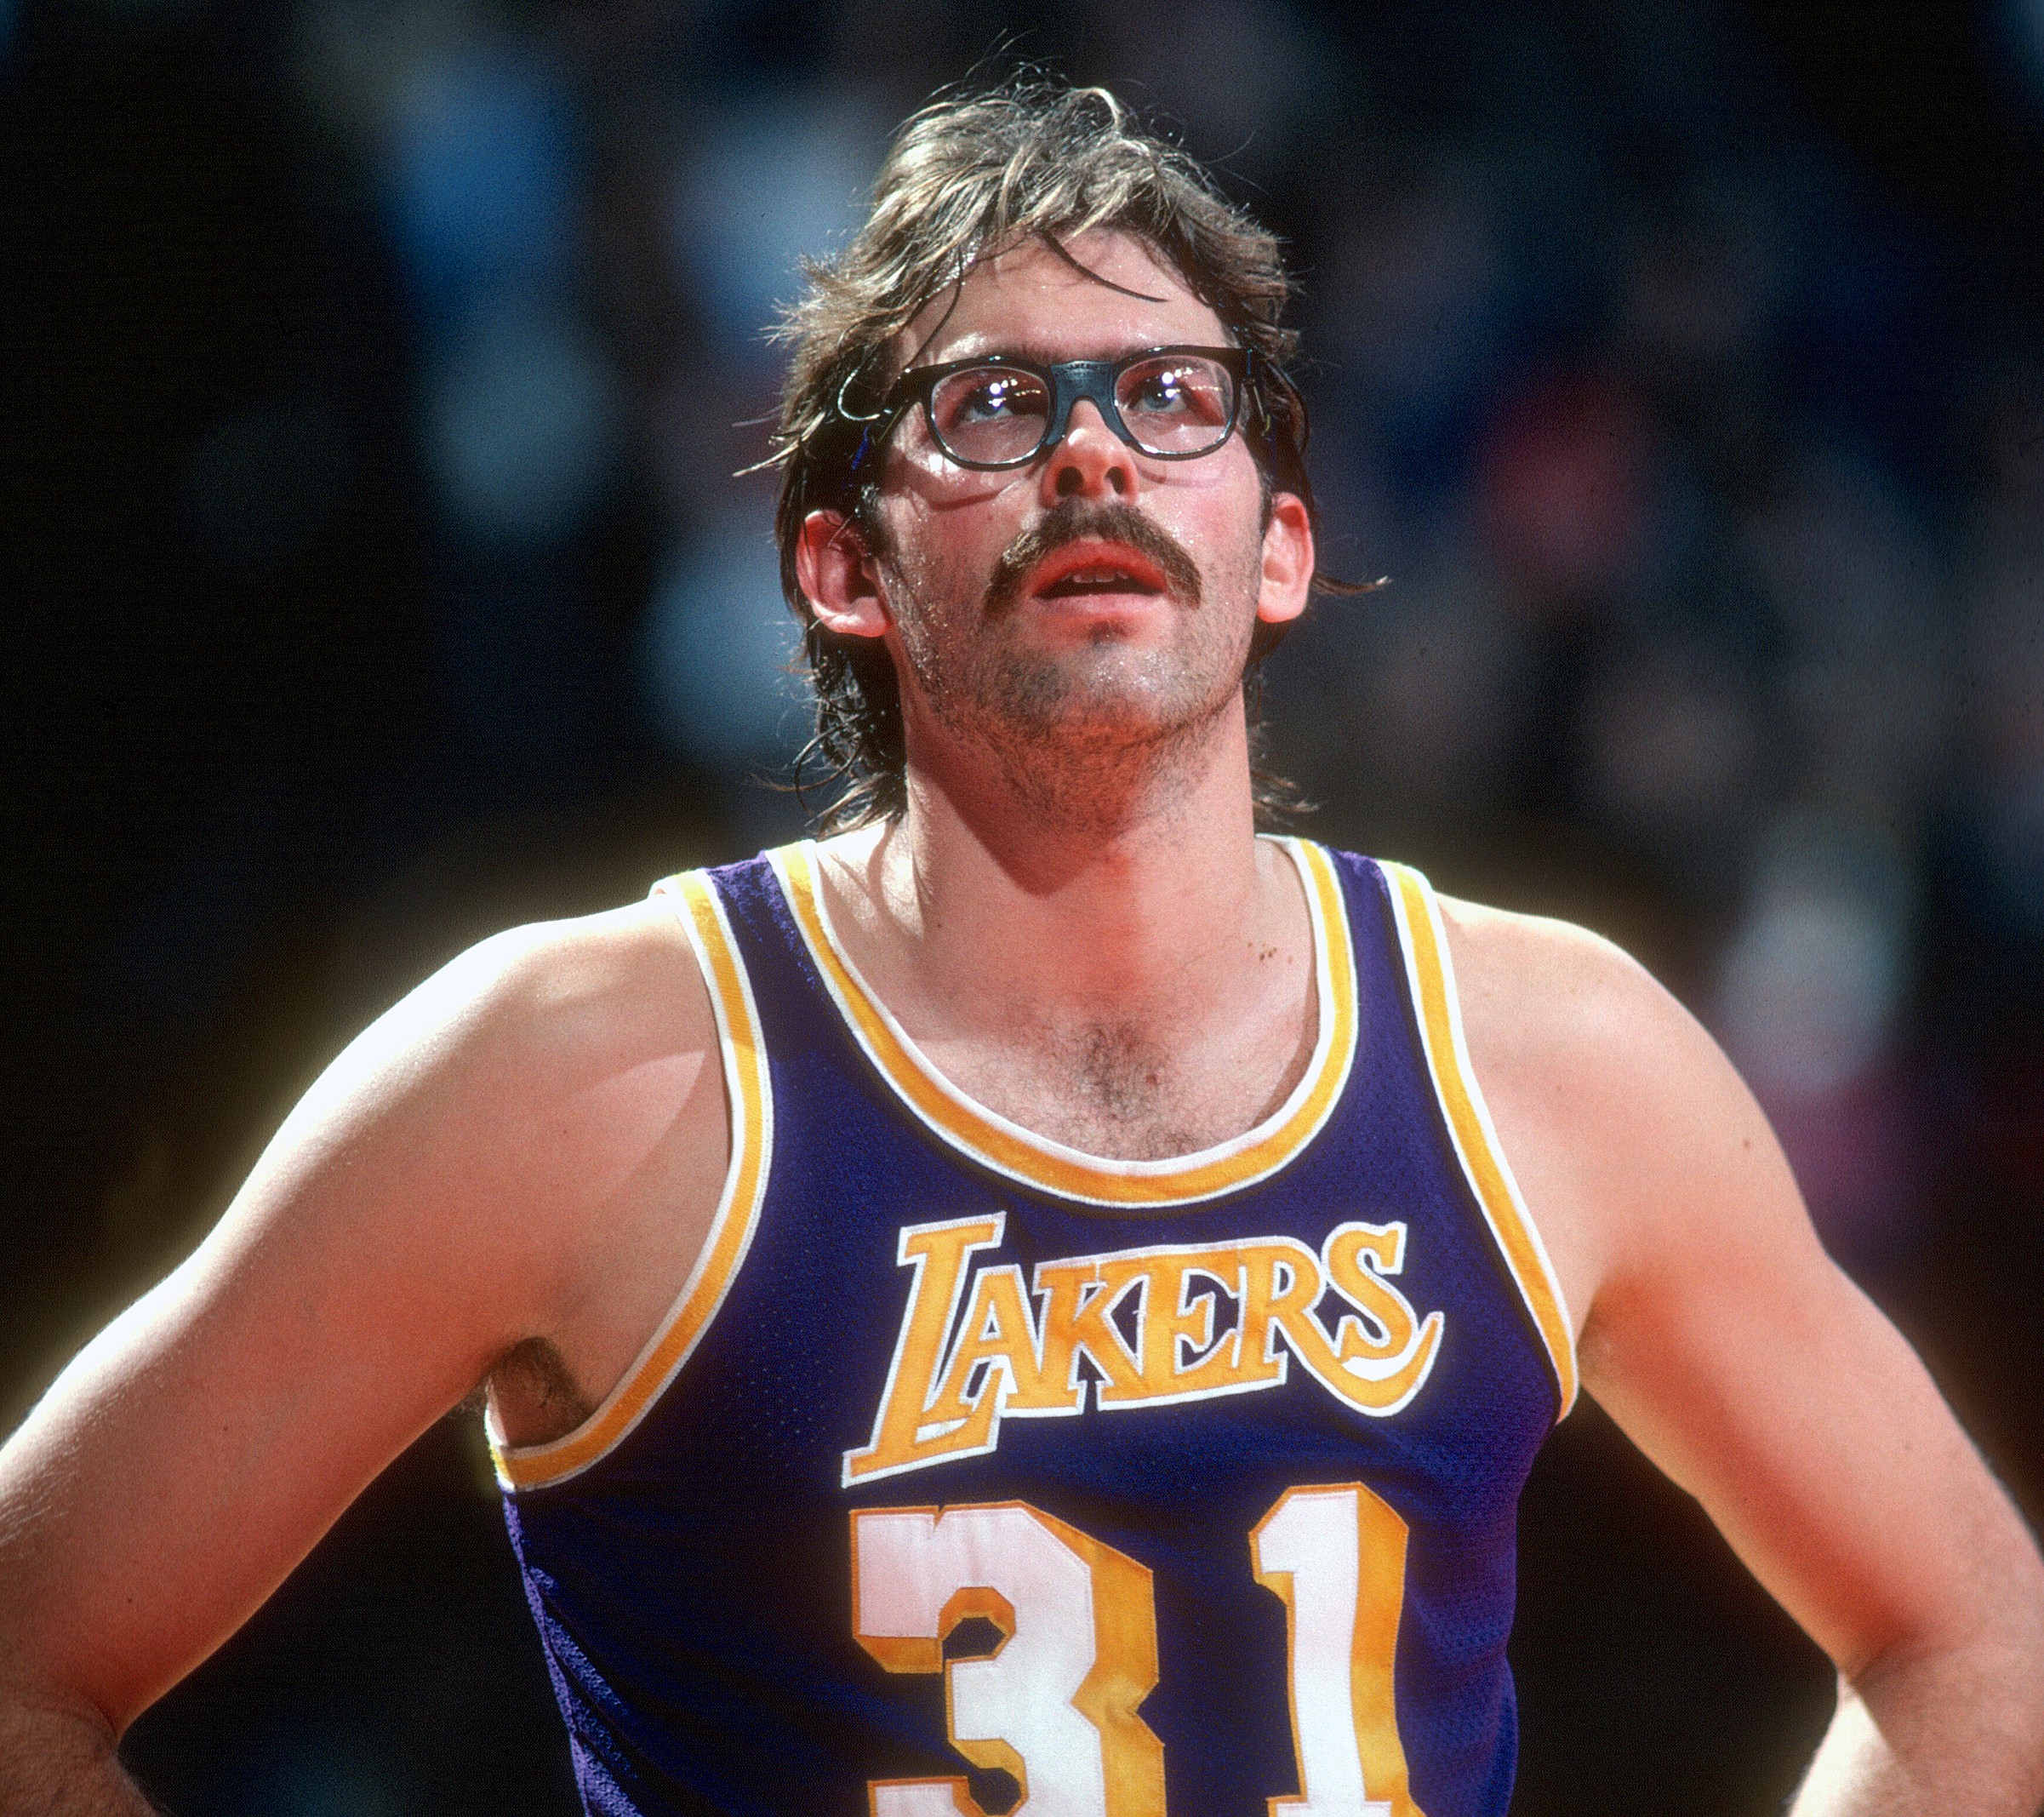 Kurt Rambis of the Los Angeles Lakers looks on against the Washington Bullets.